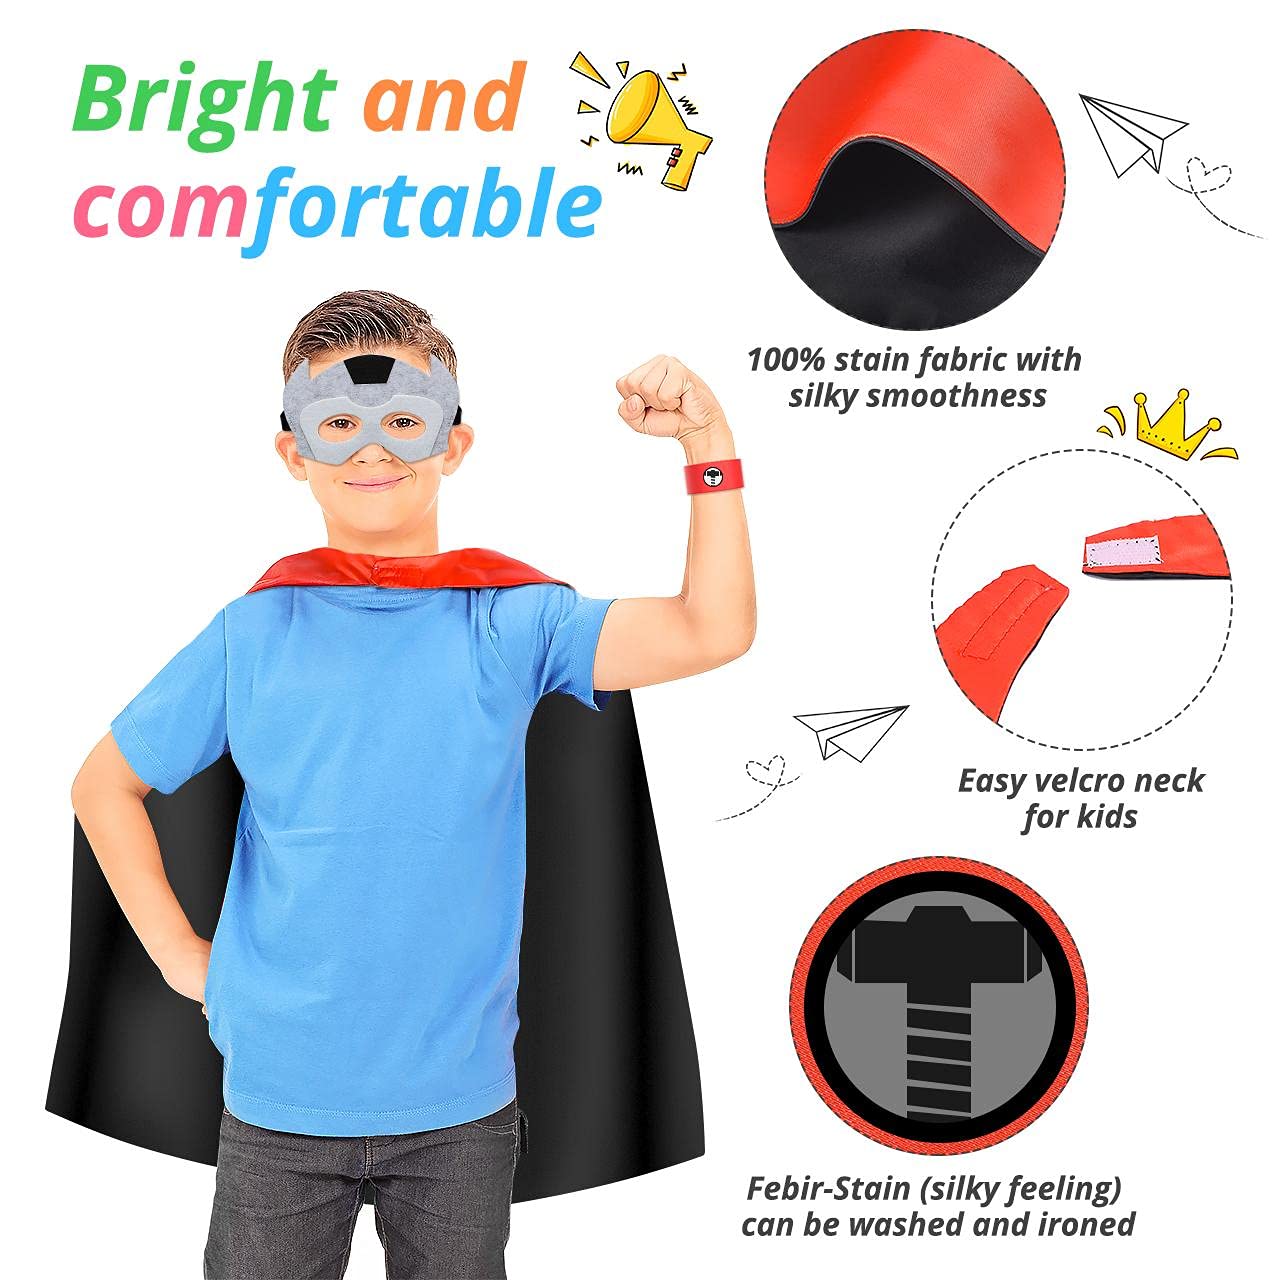 Roko Toys for 3-10 Year Old Boys, Superhero Capes for Kids 3-10 Year Old Boy Gifts Boys Cartoon Dress up Costumes Party Supplies 4 Pack RKUSPF04, Medium (Smart-S3)